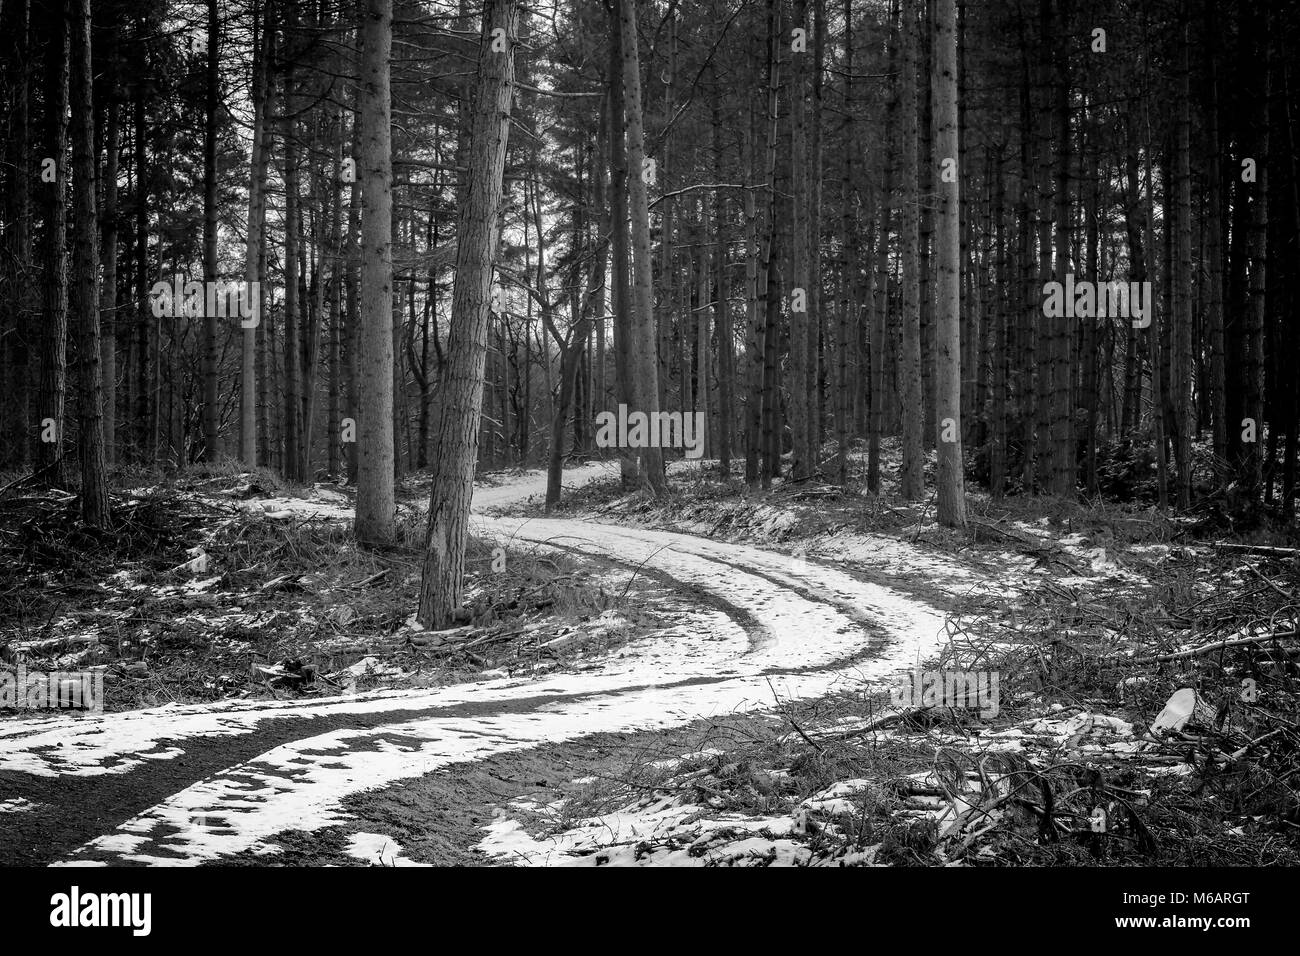 Black and white image of a snow covered winding trail through the tall fir trees at Delamere Forest Park, southeast of Frodsham, Cheshire, England Stock Photo